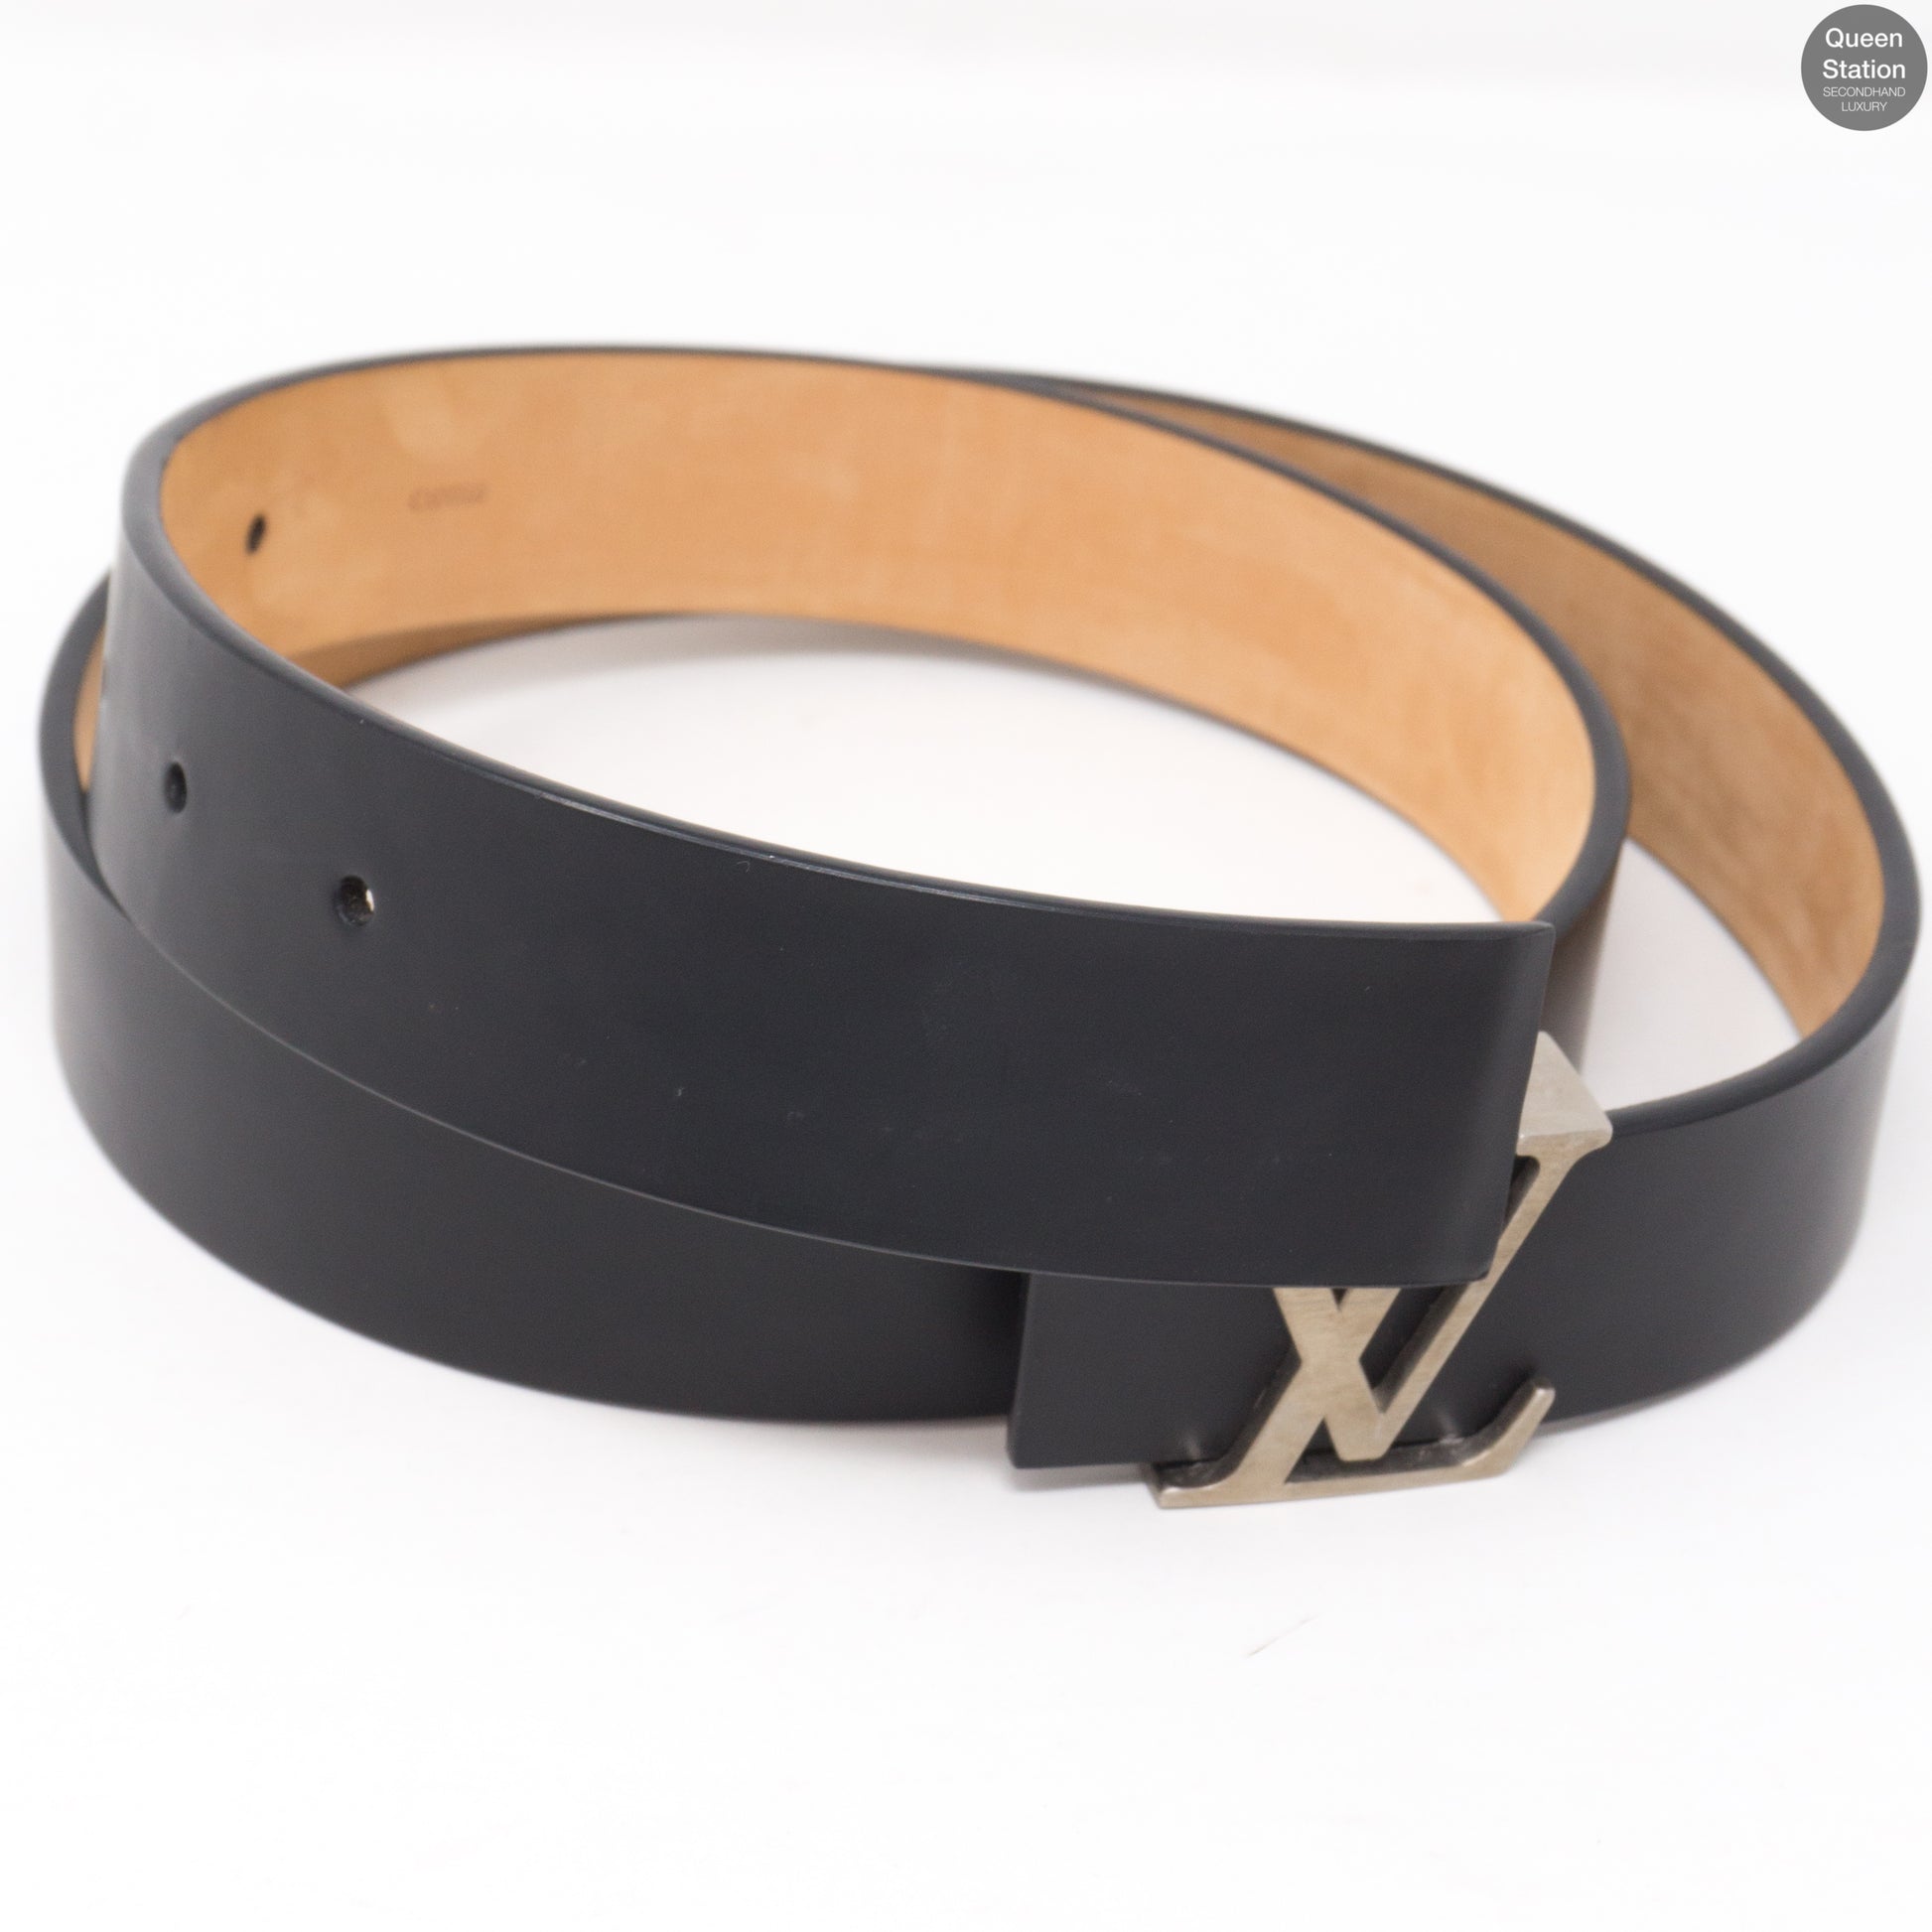 Initiales leather belt Louis Vuitton Black size 85 cm in Leather - 22053004